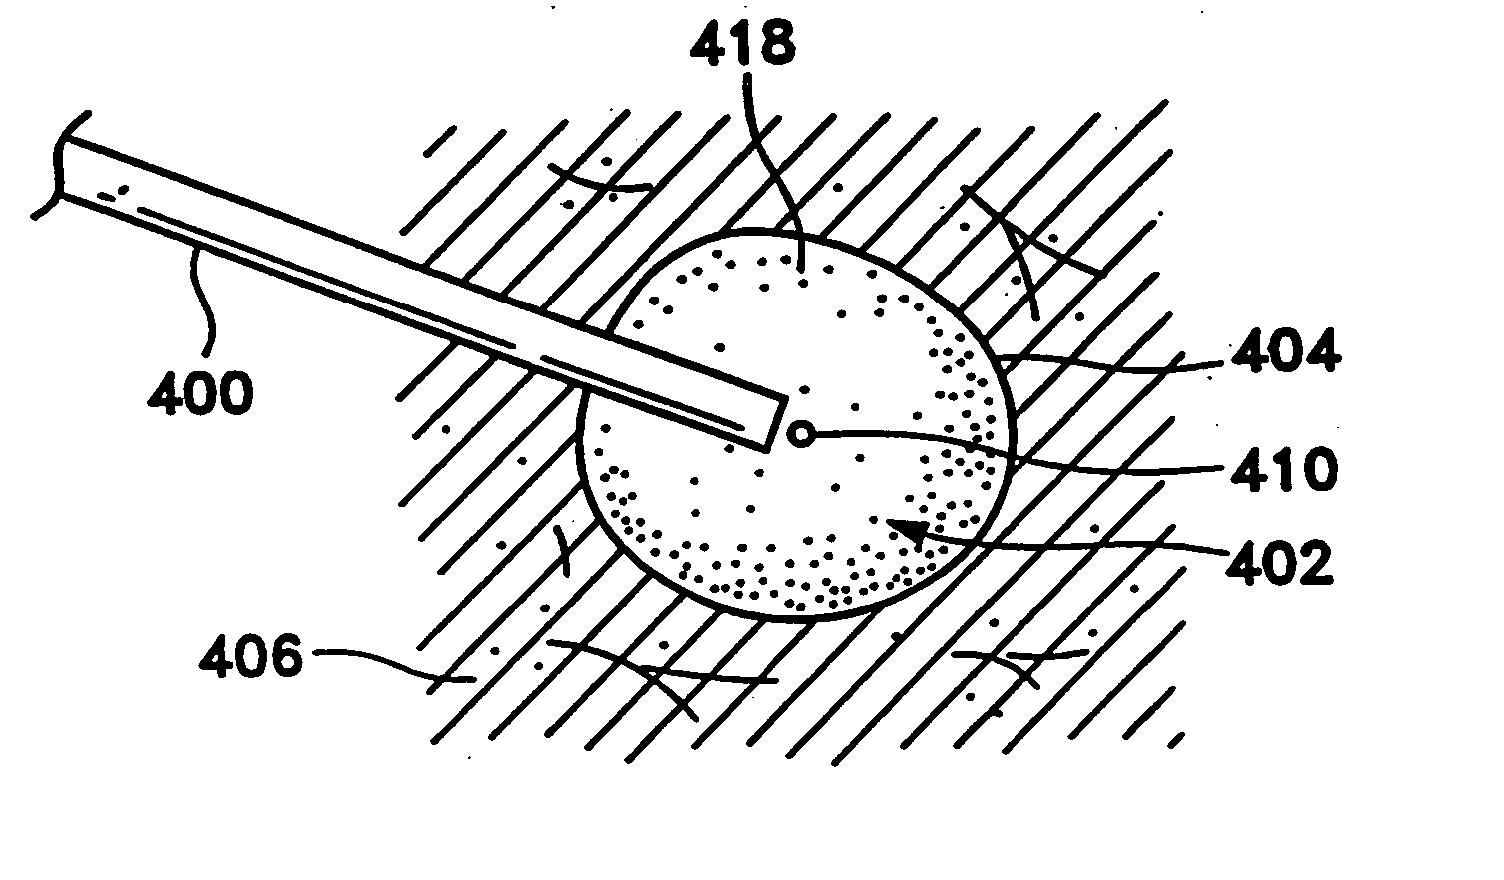 Biopsy cavity marking device and method